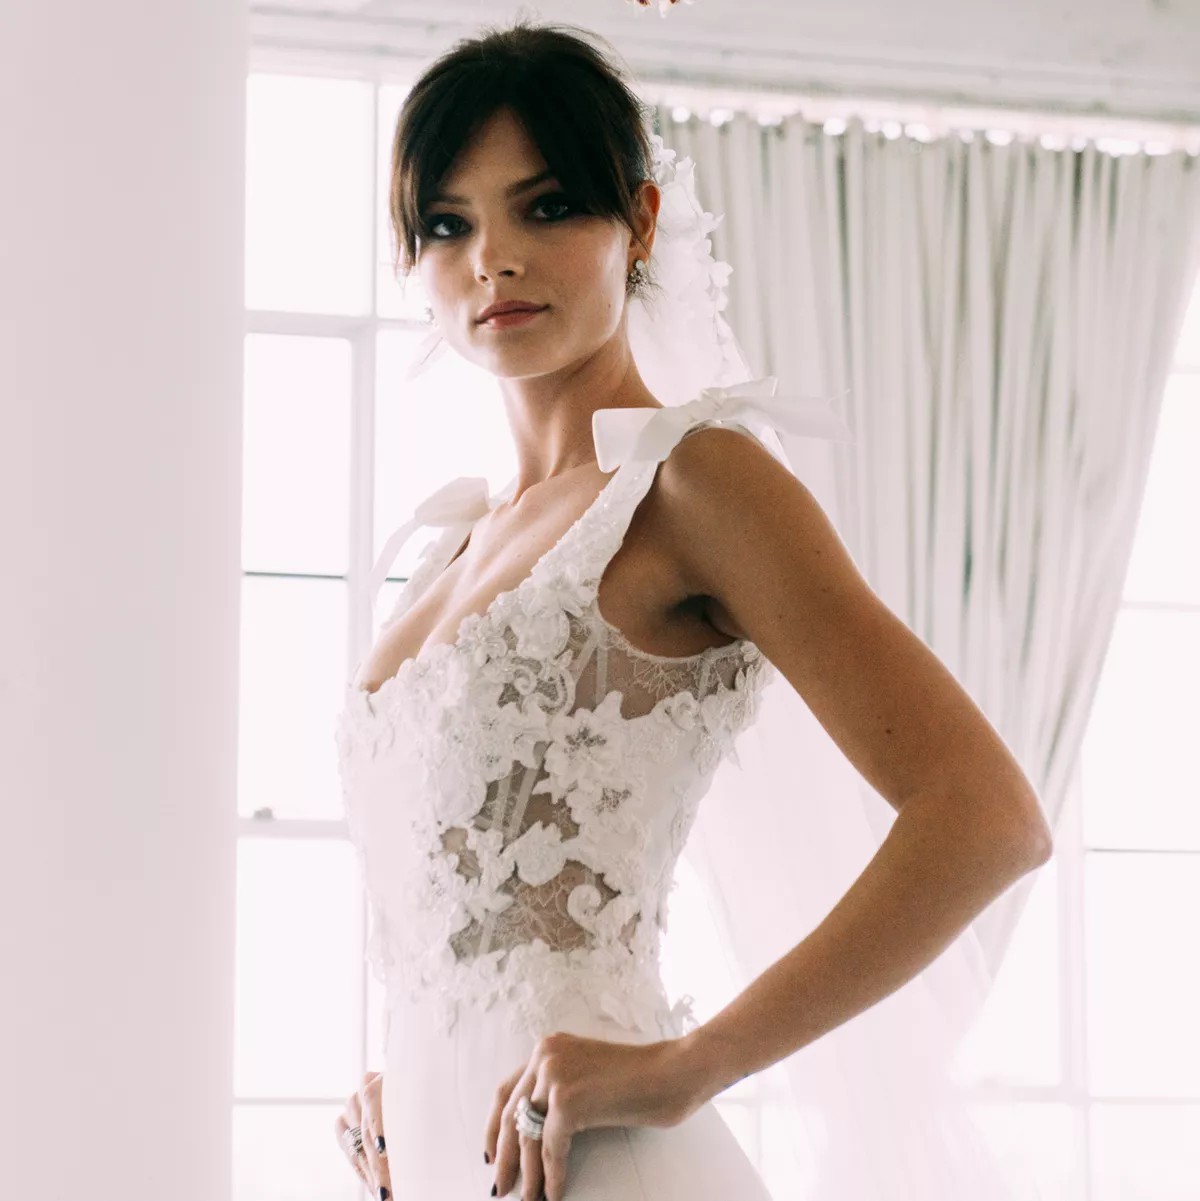 How To Choose Your Dream Wedding Dress | These Tips Will Help You Find "The One" For Your Big Day.”